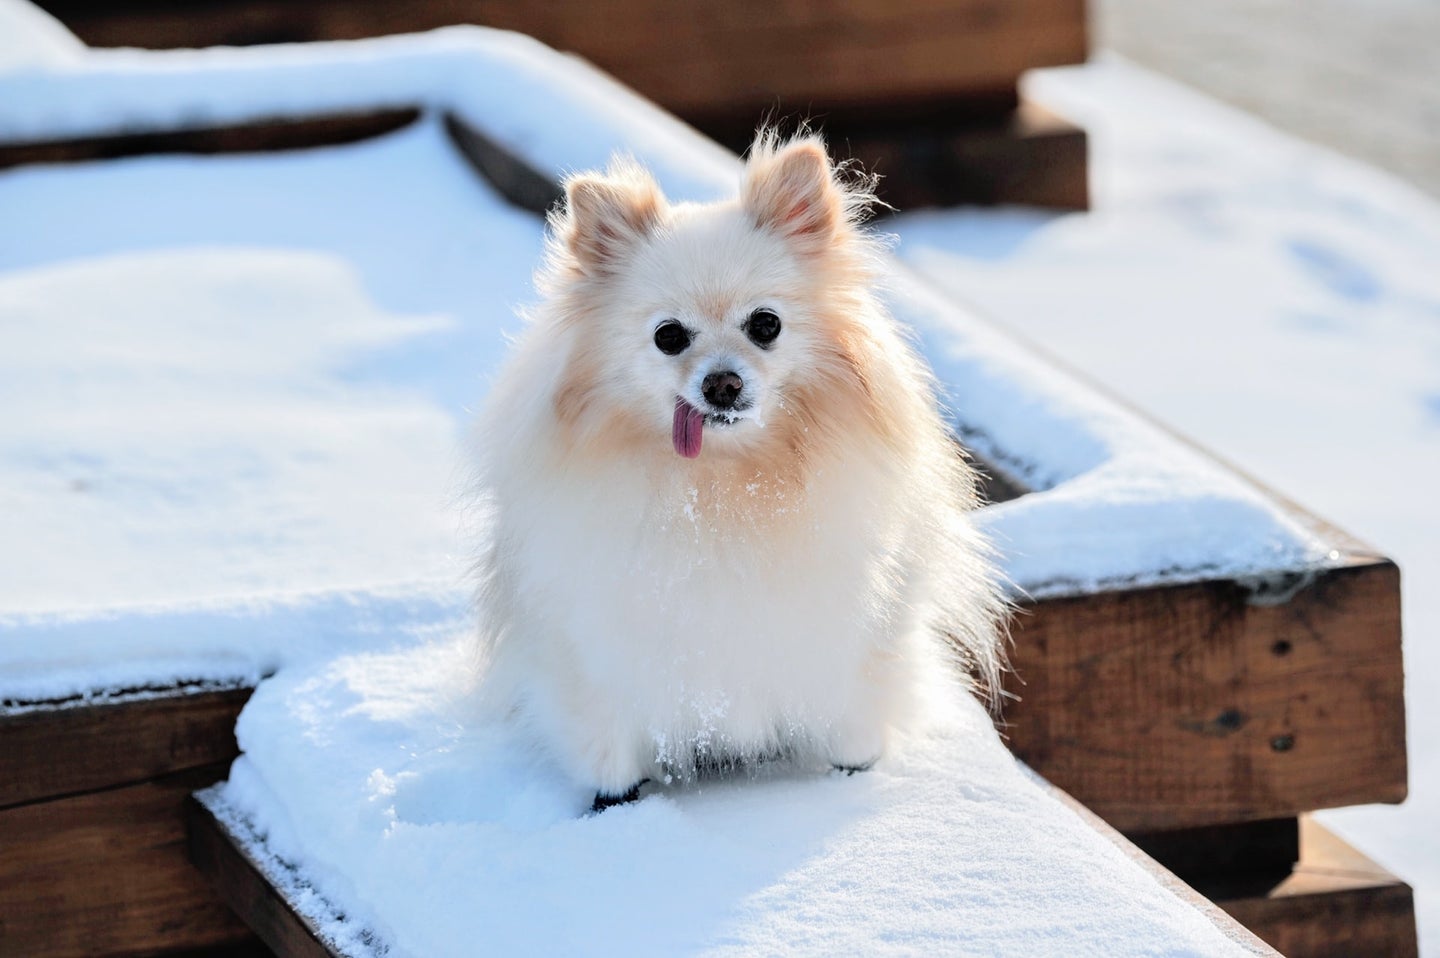 A white Pomeranian on a snowy ledge with its tongue stuck out